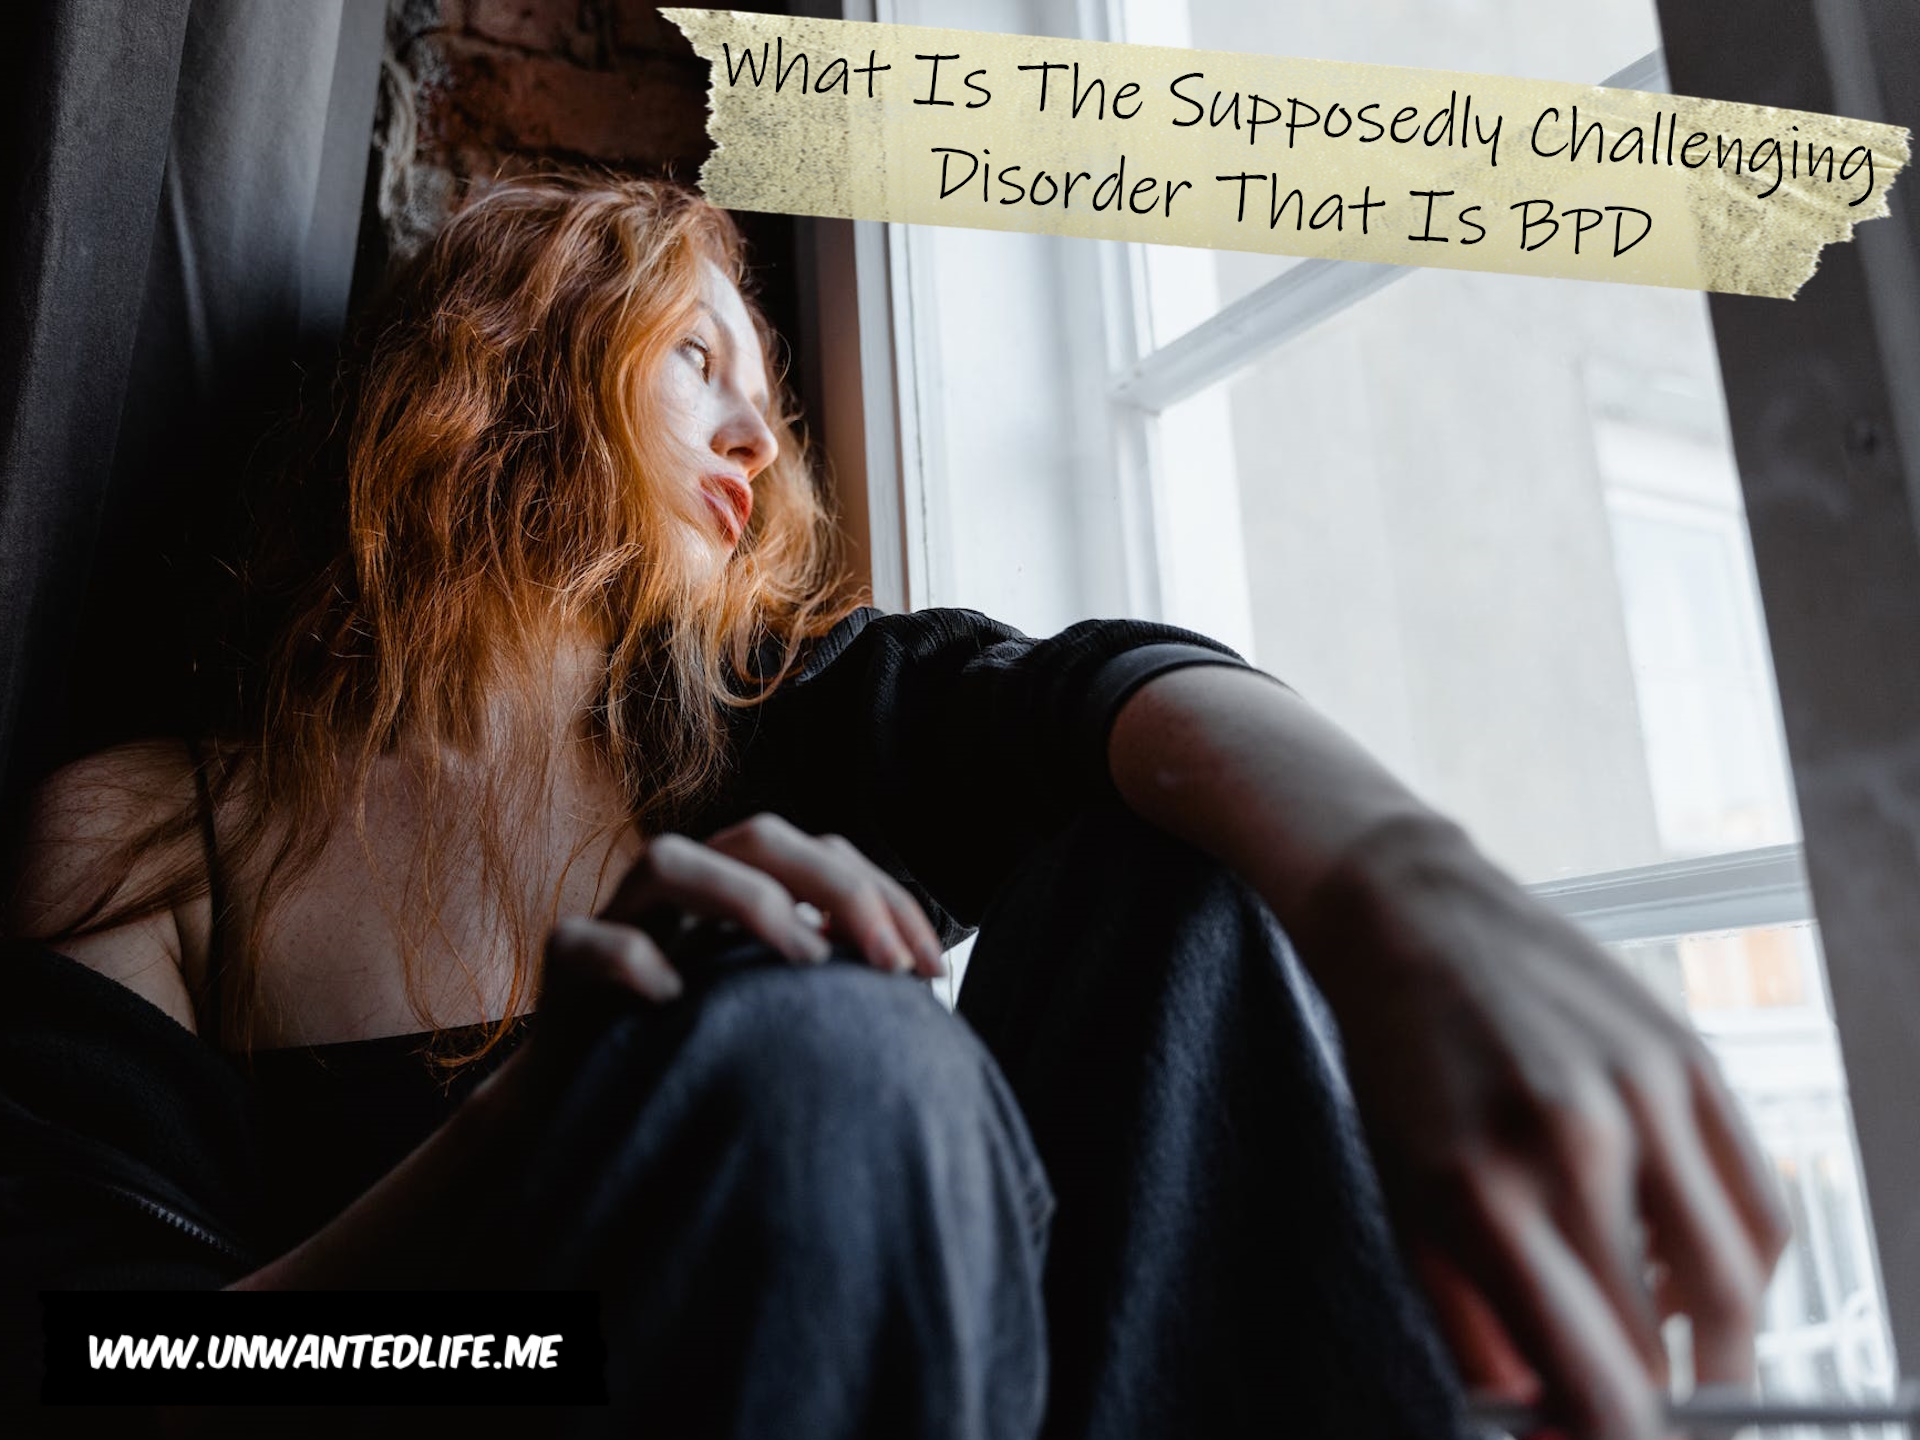 A red headed White woman looking out of a window looking sad to represent the topic of the article - What Is The Supposedly Challenging Disorder That Is BPD